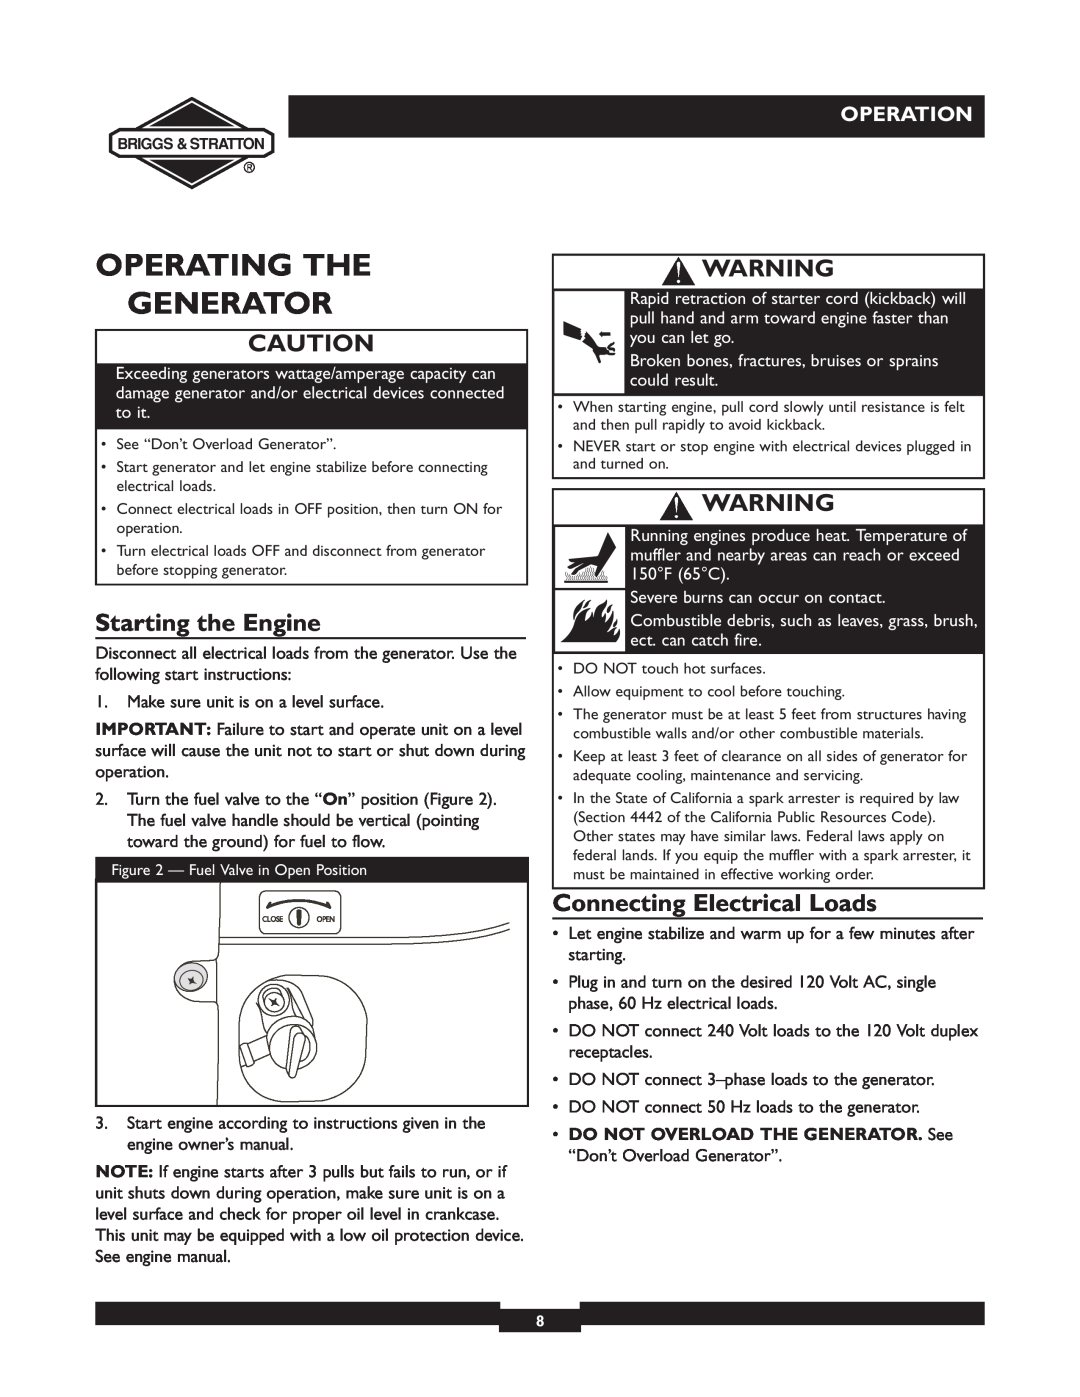 Briggs & Stratton 01532-4 owner manual Operating The Generator, Starting the Engine, Connecting Electrical Loads, Operation 